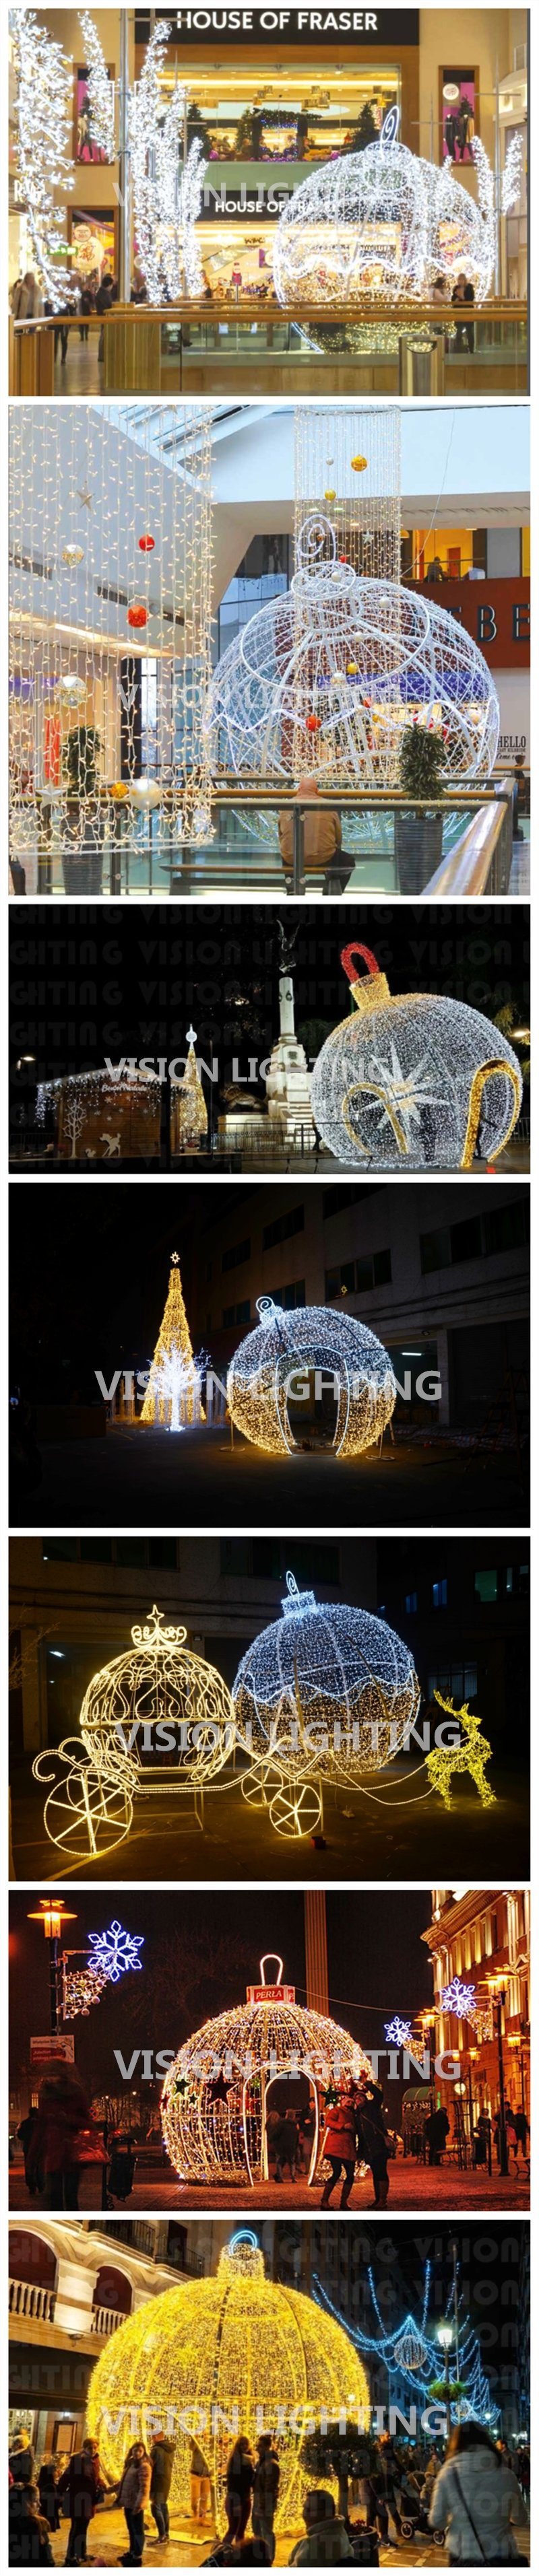 Outdoor Large LED Christmas Ball Lights for Outdoor Decorations